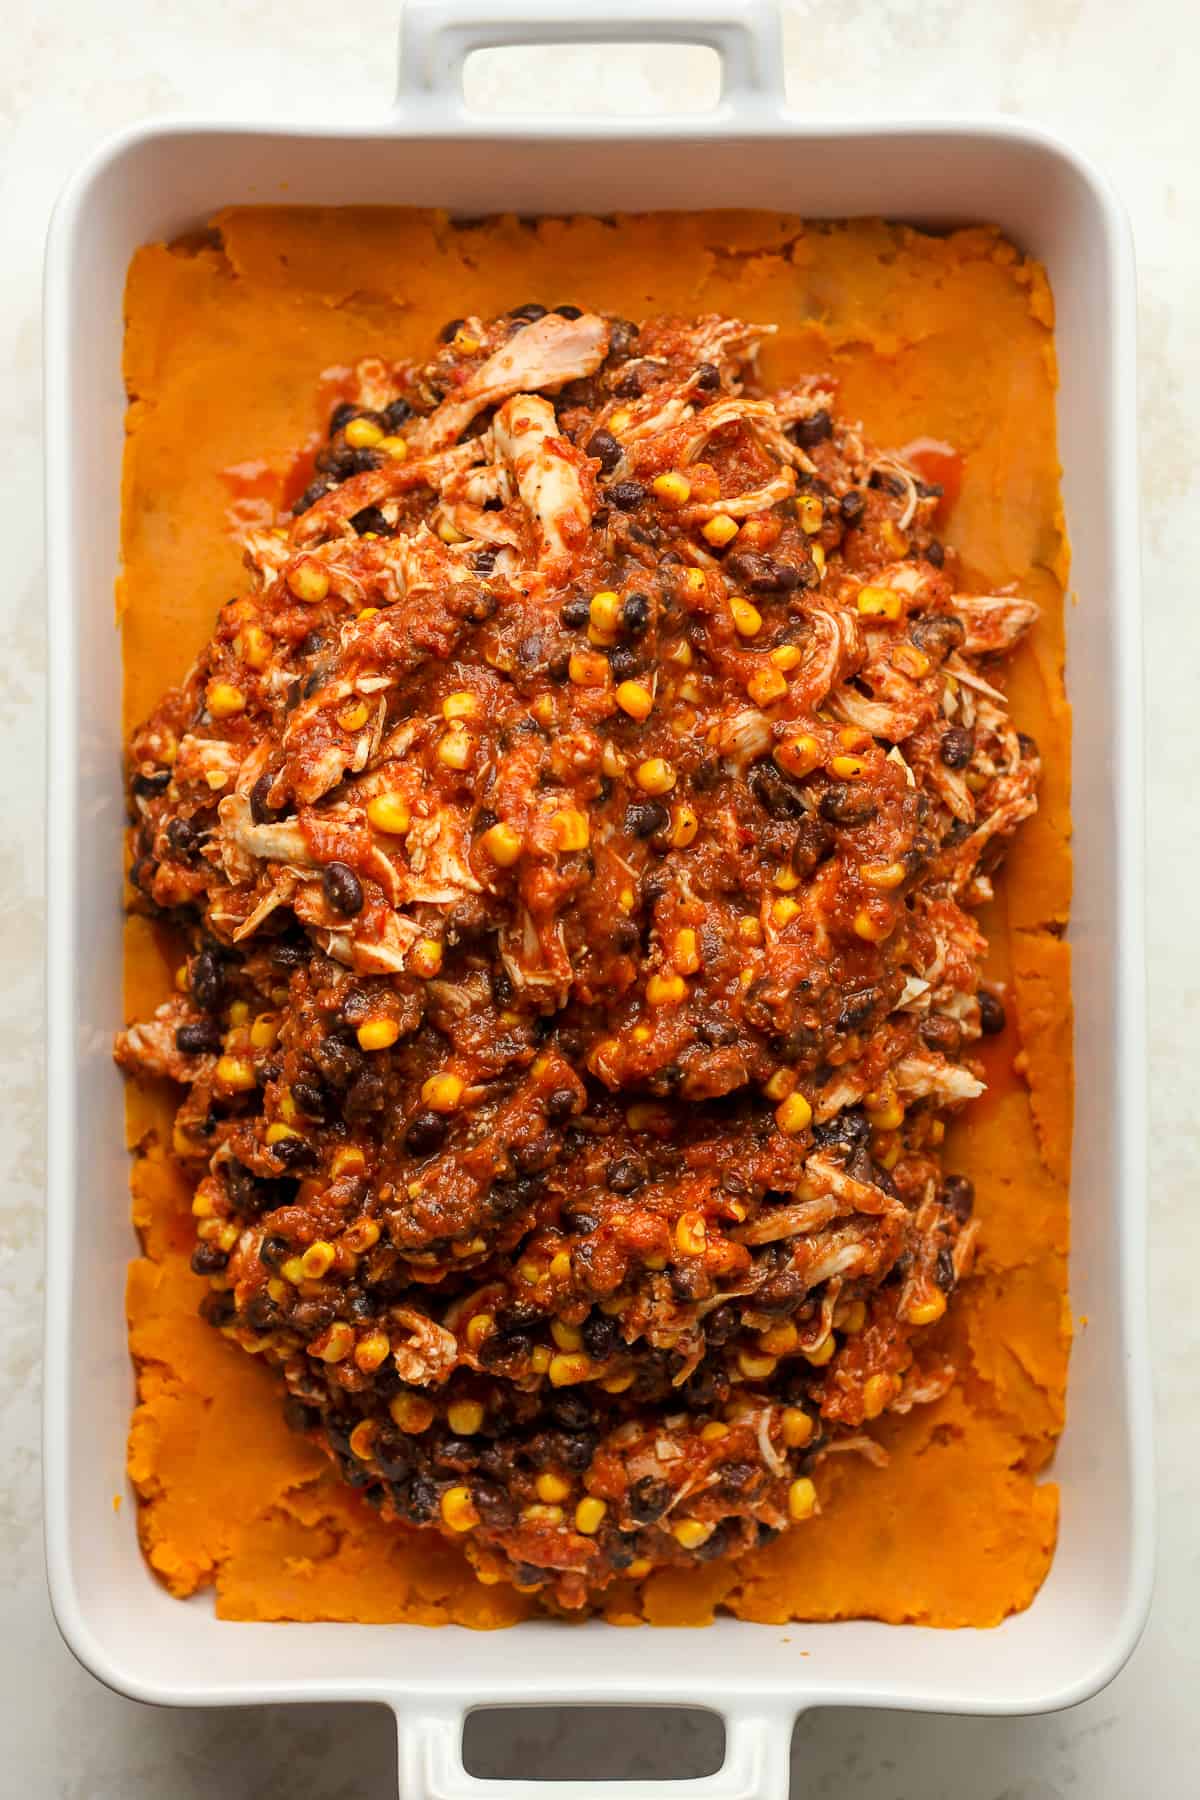 The casserole showing the sweet potato layer and the chicken with sauce on top.